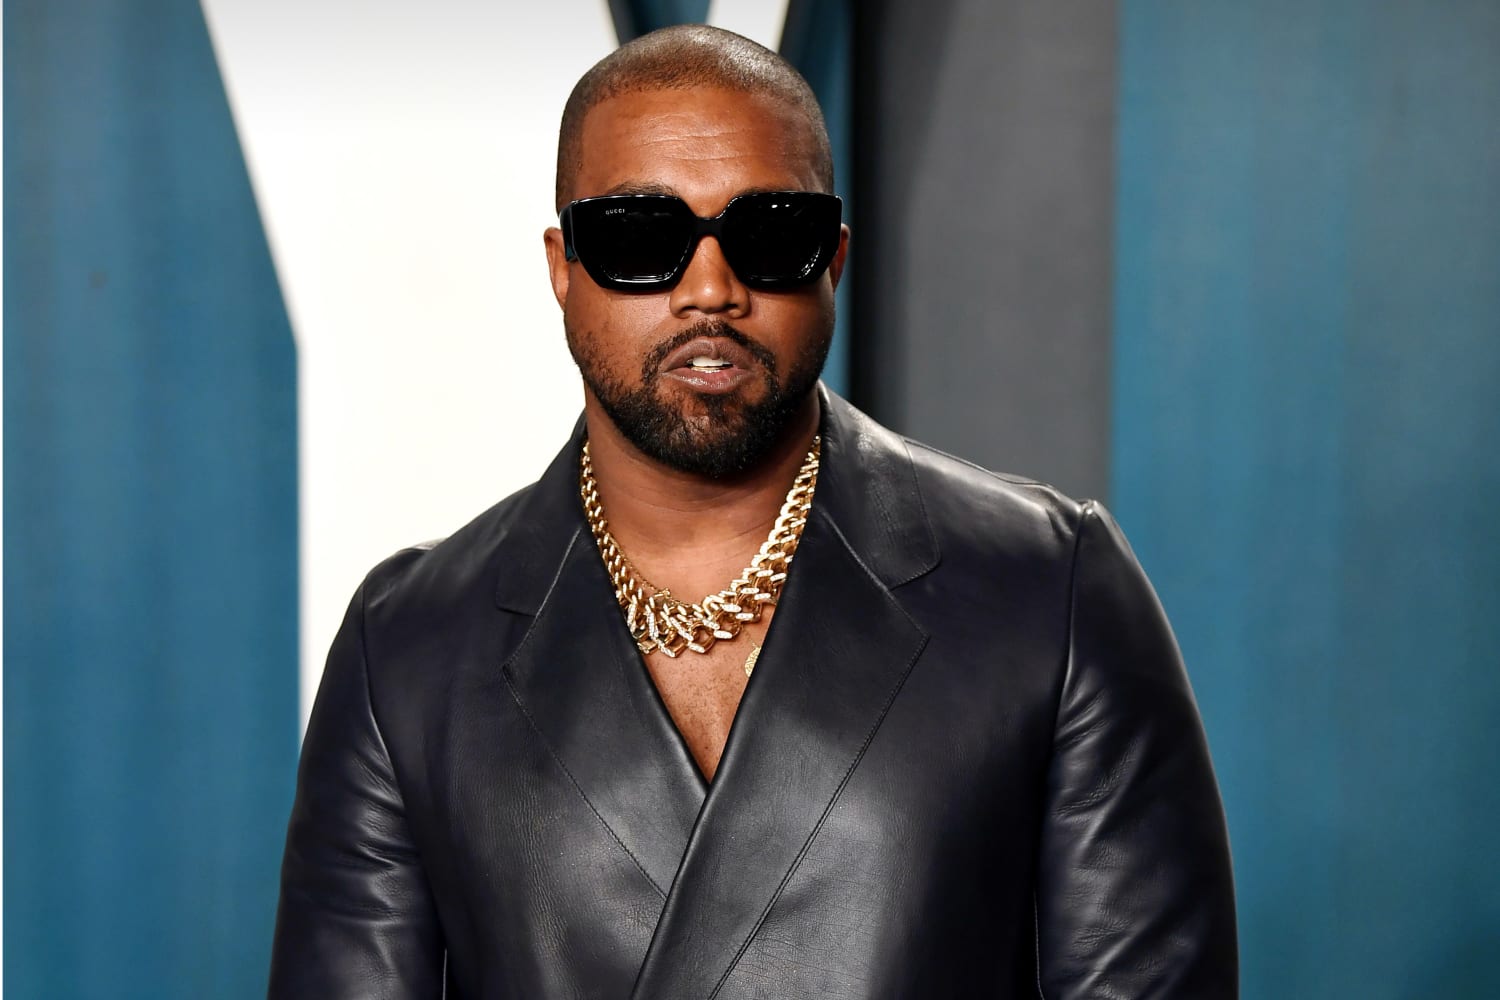 Ye, formerly Kanye West, considered suspect in battery investigation